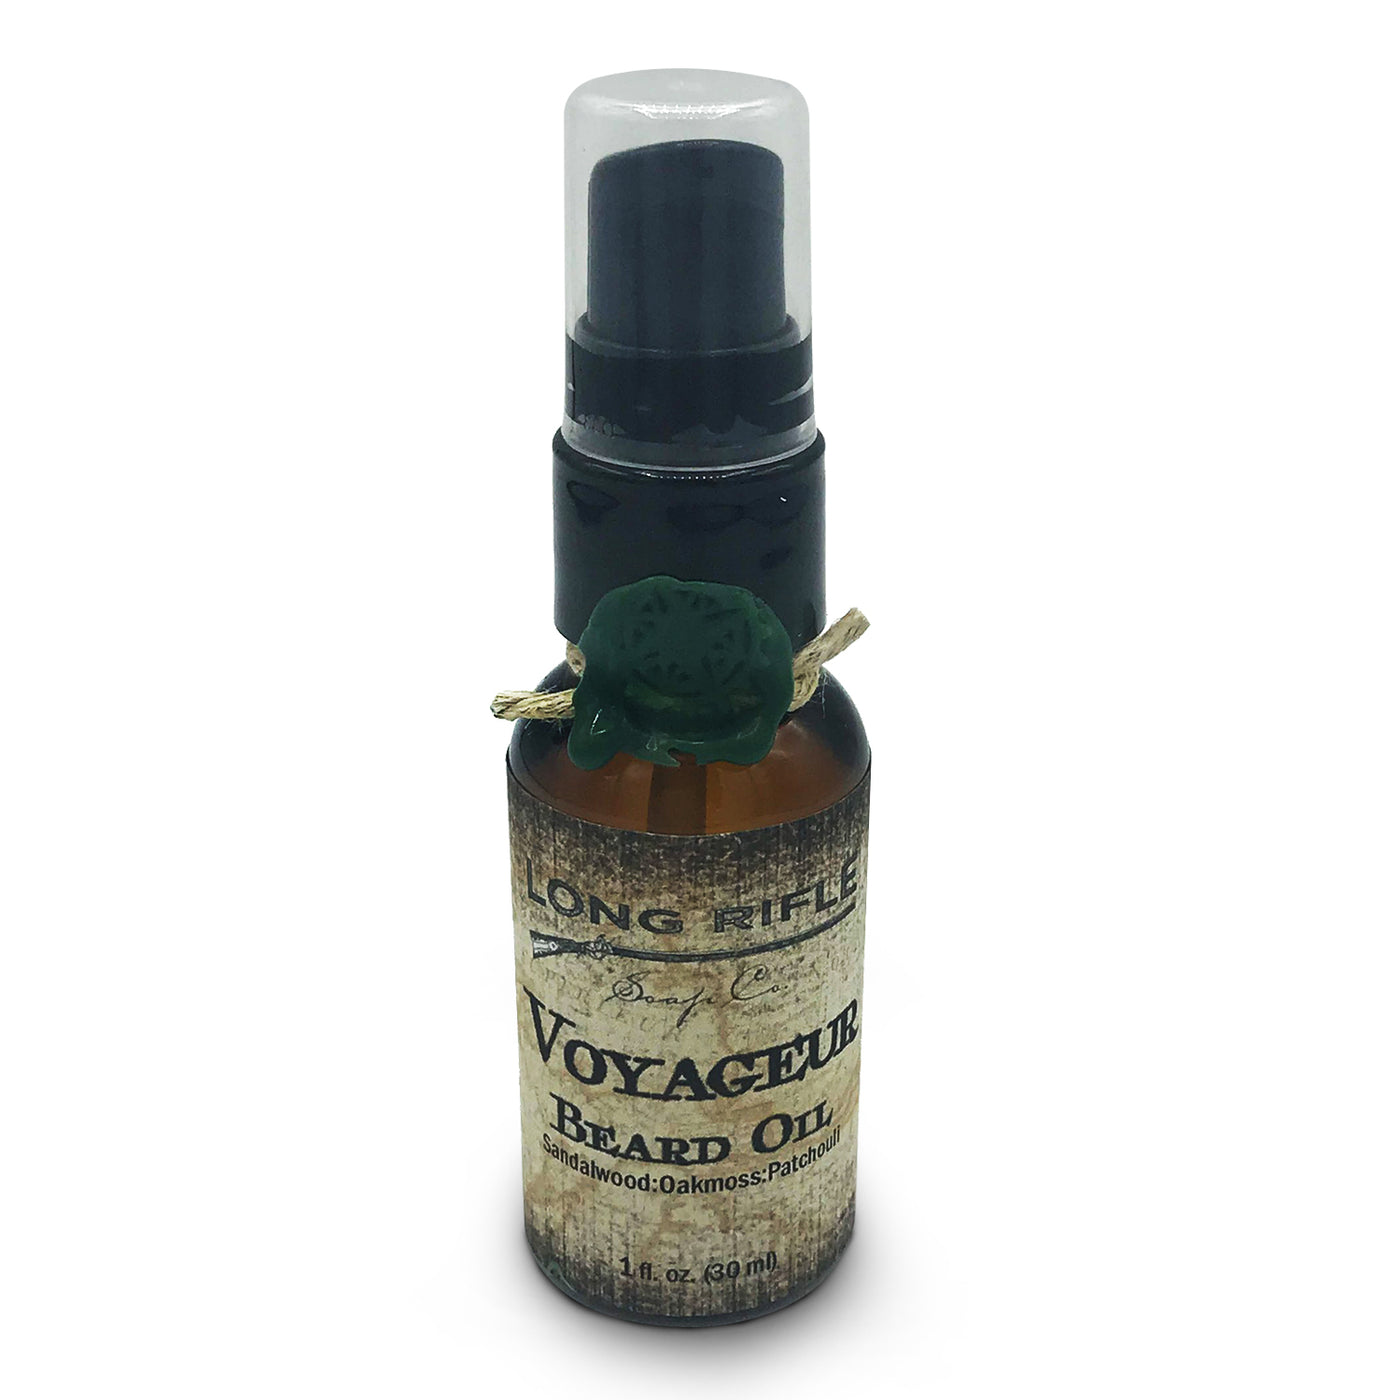  Voyageur Beard Oil by Long Rifle sold by Naked Armor Razors